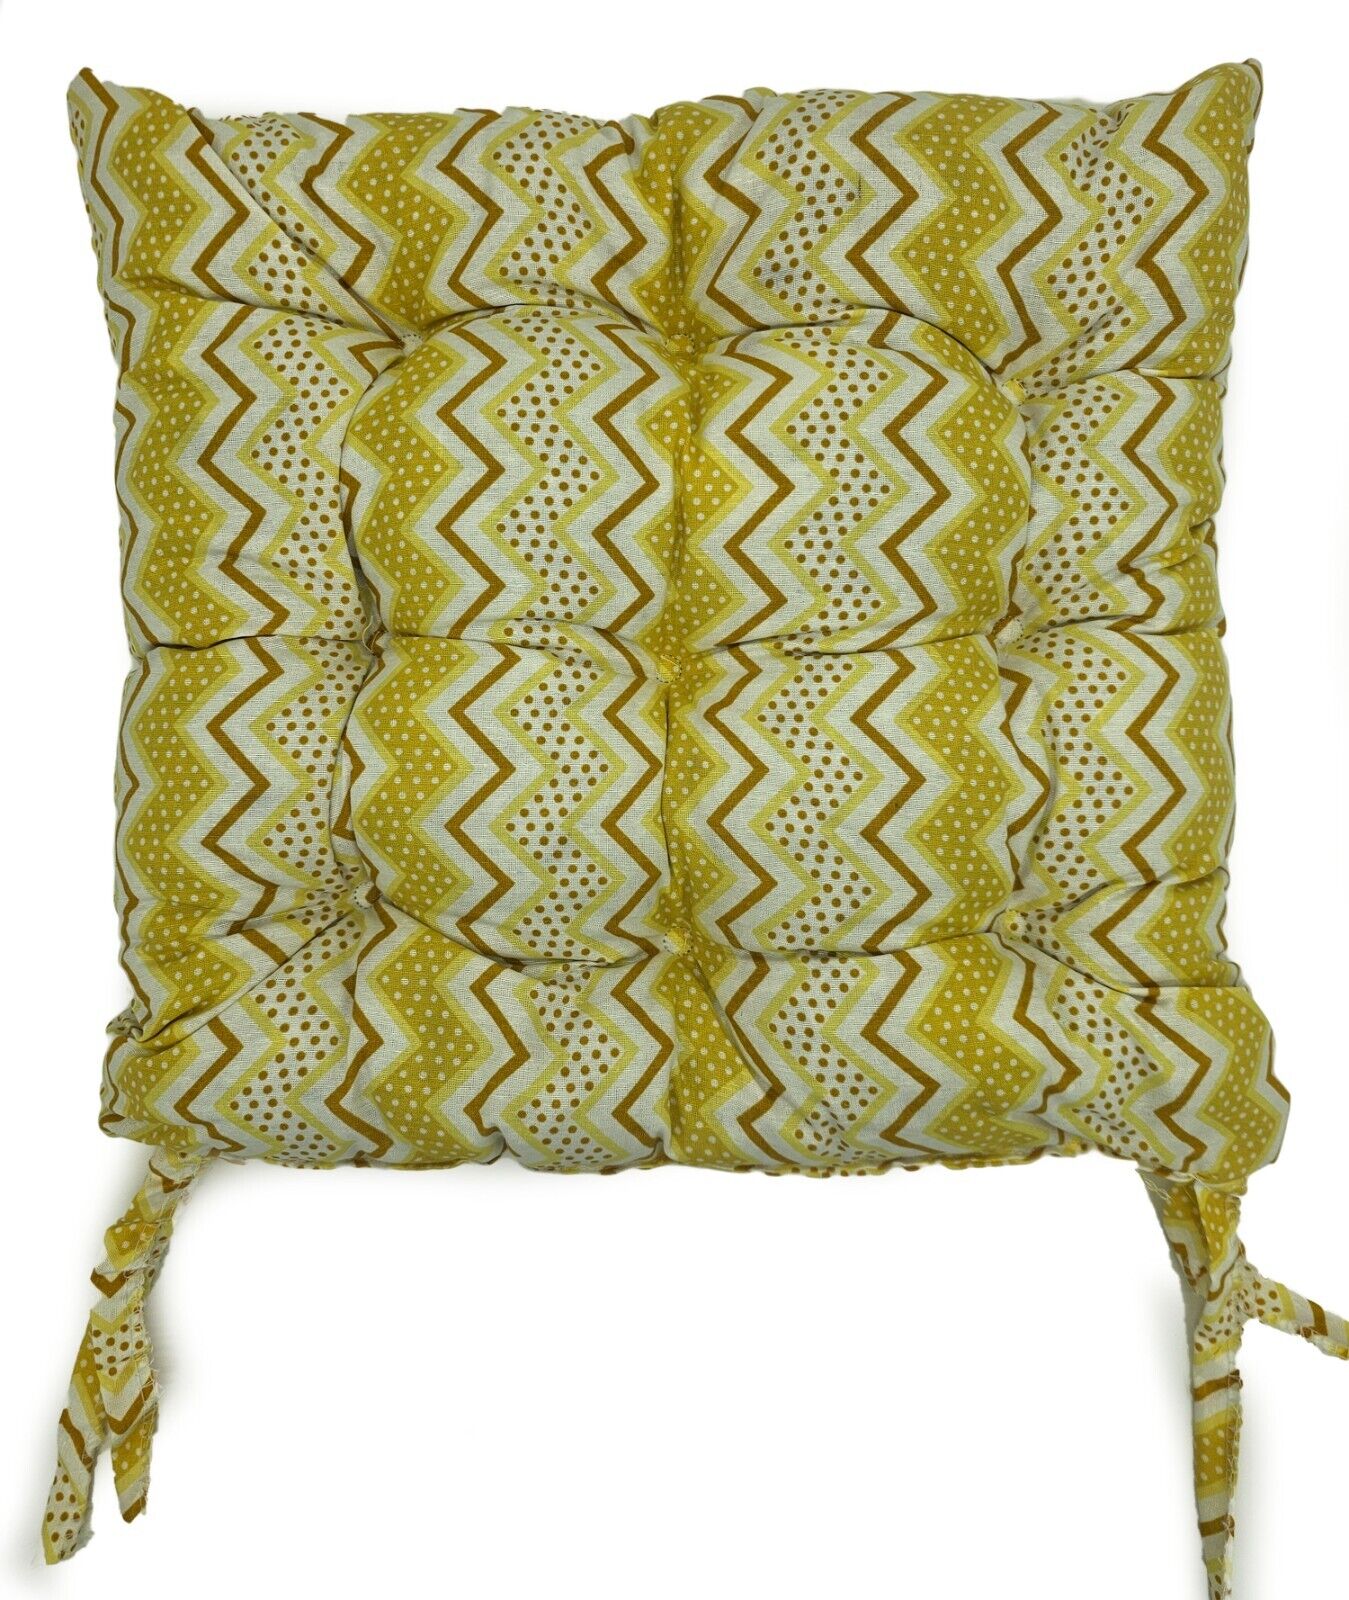 Seat Pad Dining Garden Kitchen Chair Cushions Tie On Zigzag Yellow